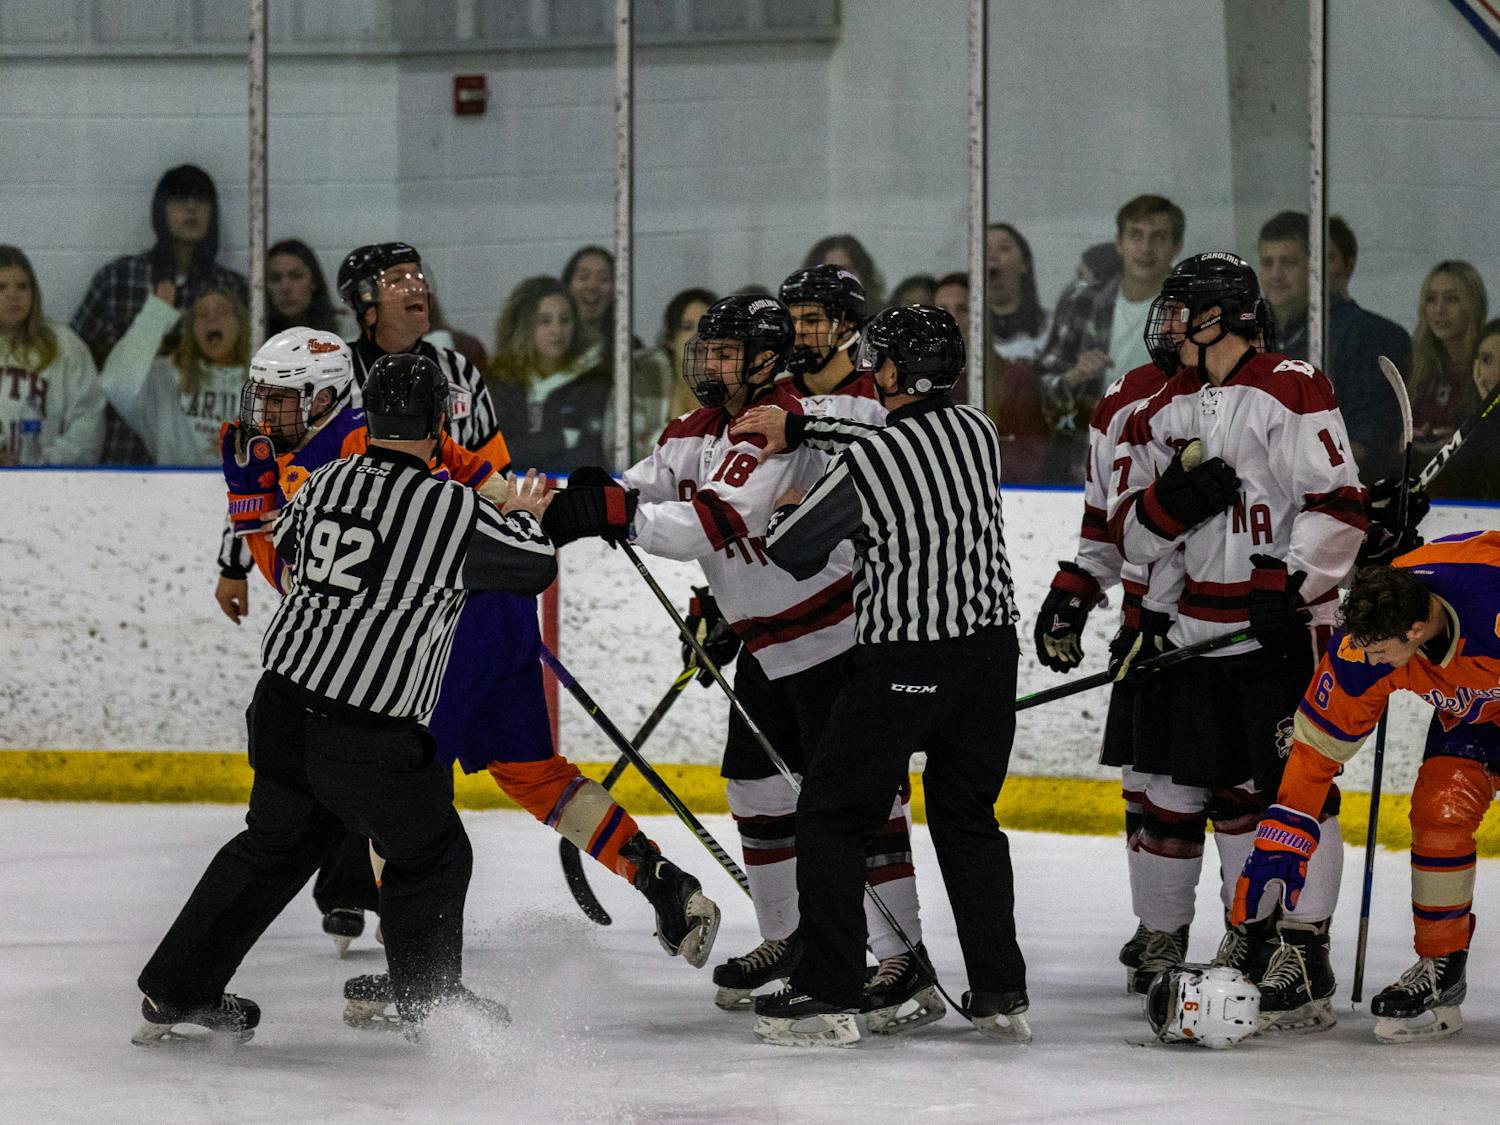 Senior winger Chad Lizine is pulled away from a Clemson opponent during a hockey match on Nov. 11, 2022. The brief scuffle is stopped early on by officials as the competition between the two South Carolina rivals heats up.